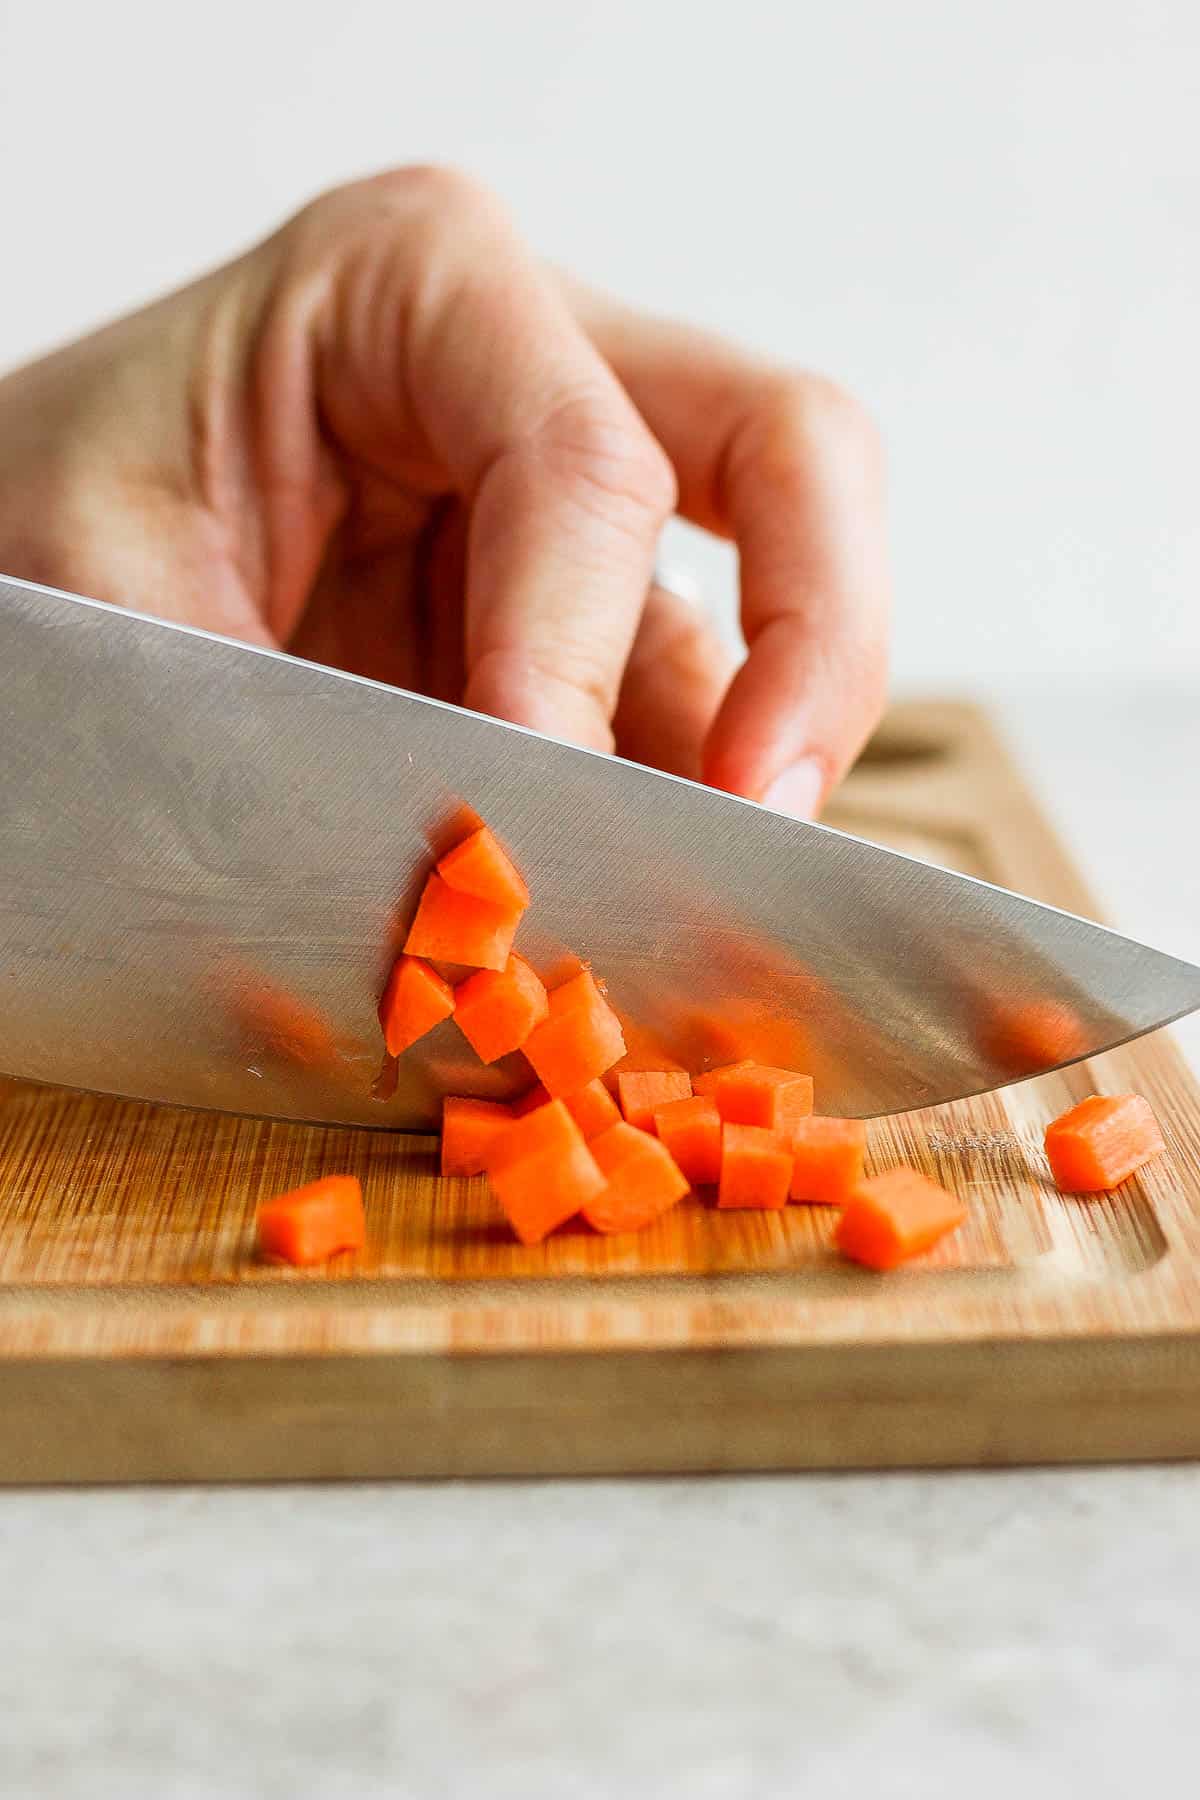 Carrot being diced on a cutting board with a large knife.